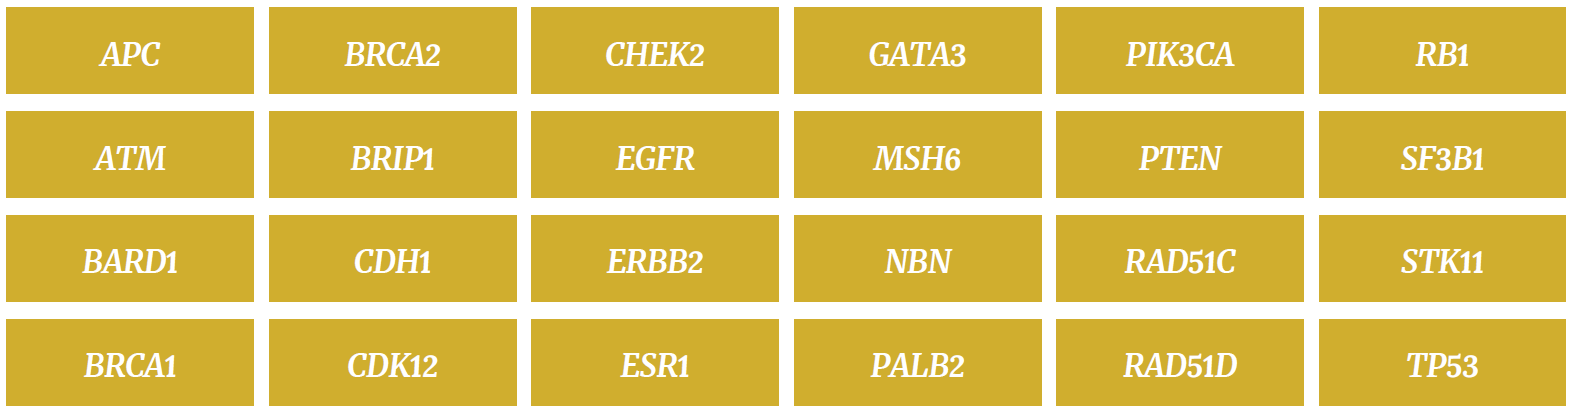 Select from any of the following myPanel breast cancer whole gene or exonic content Image